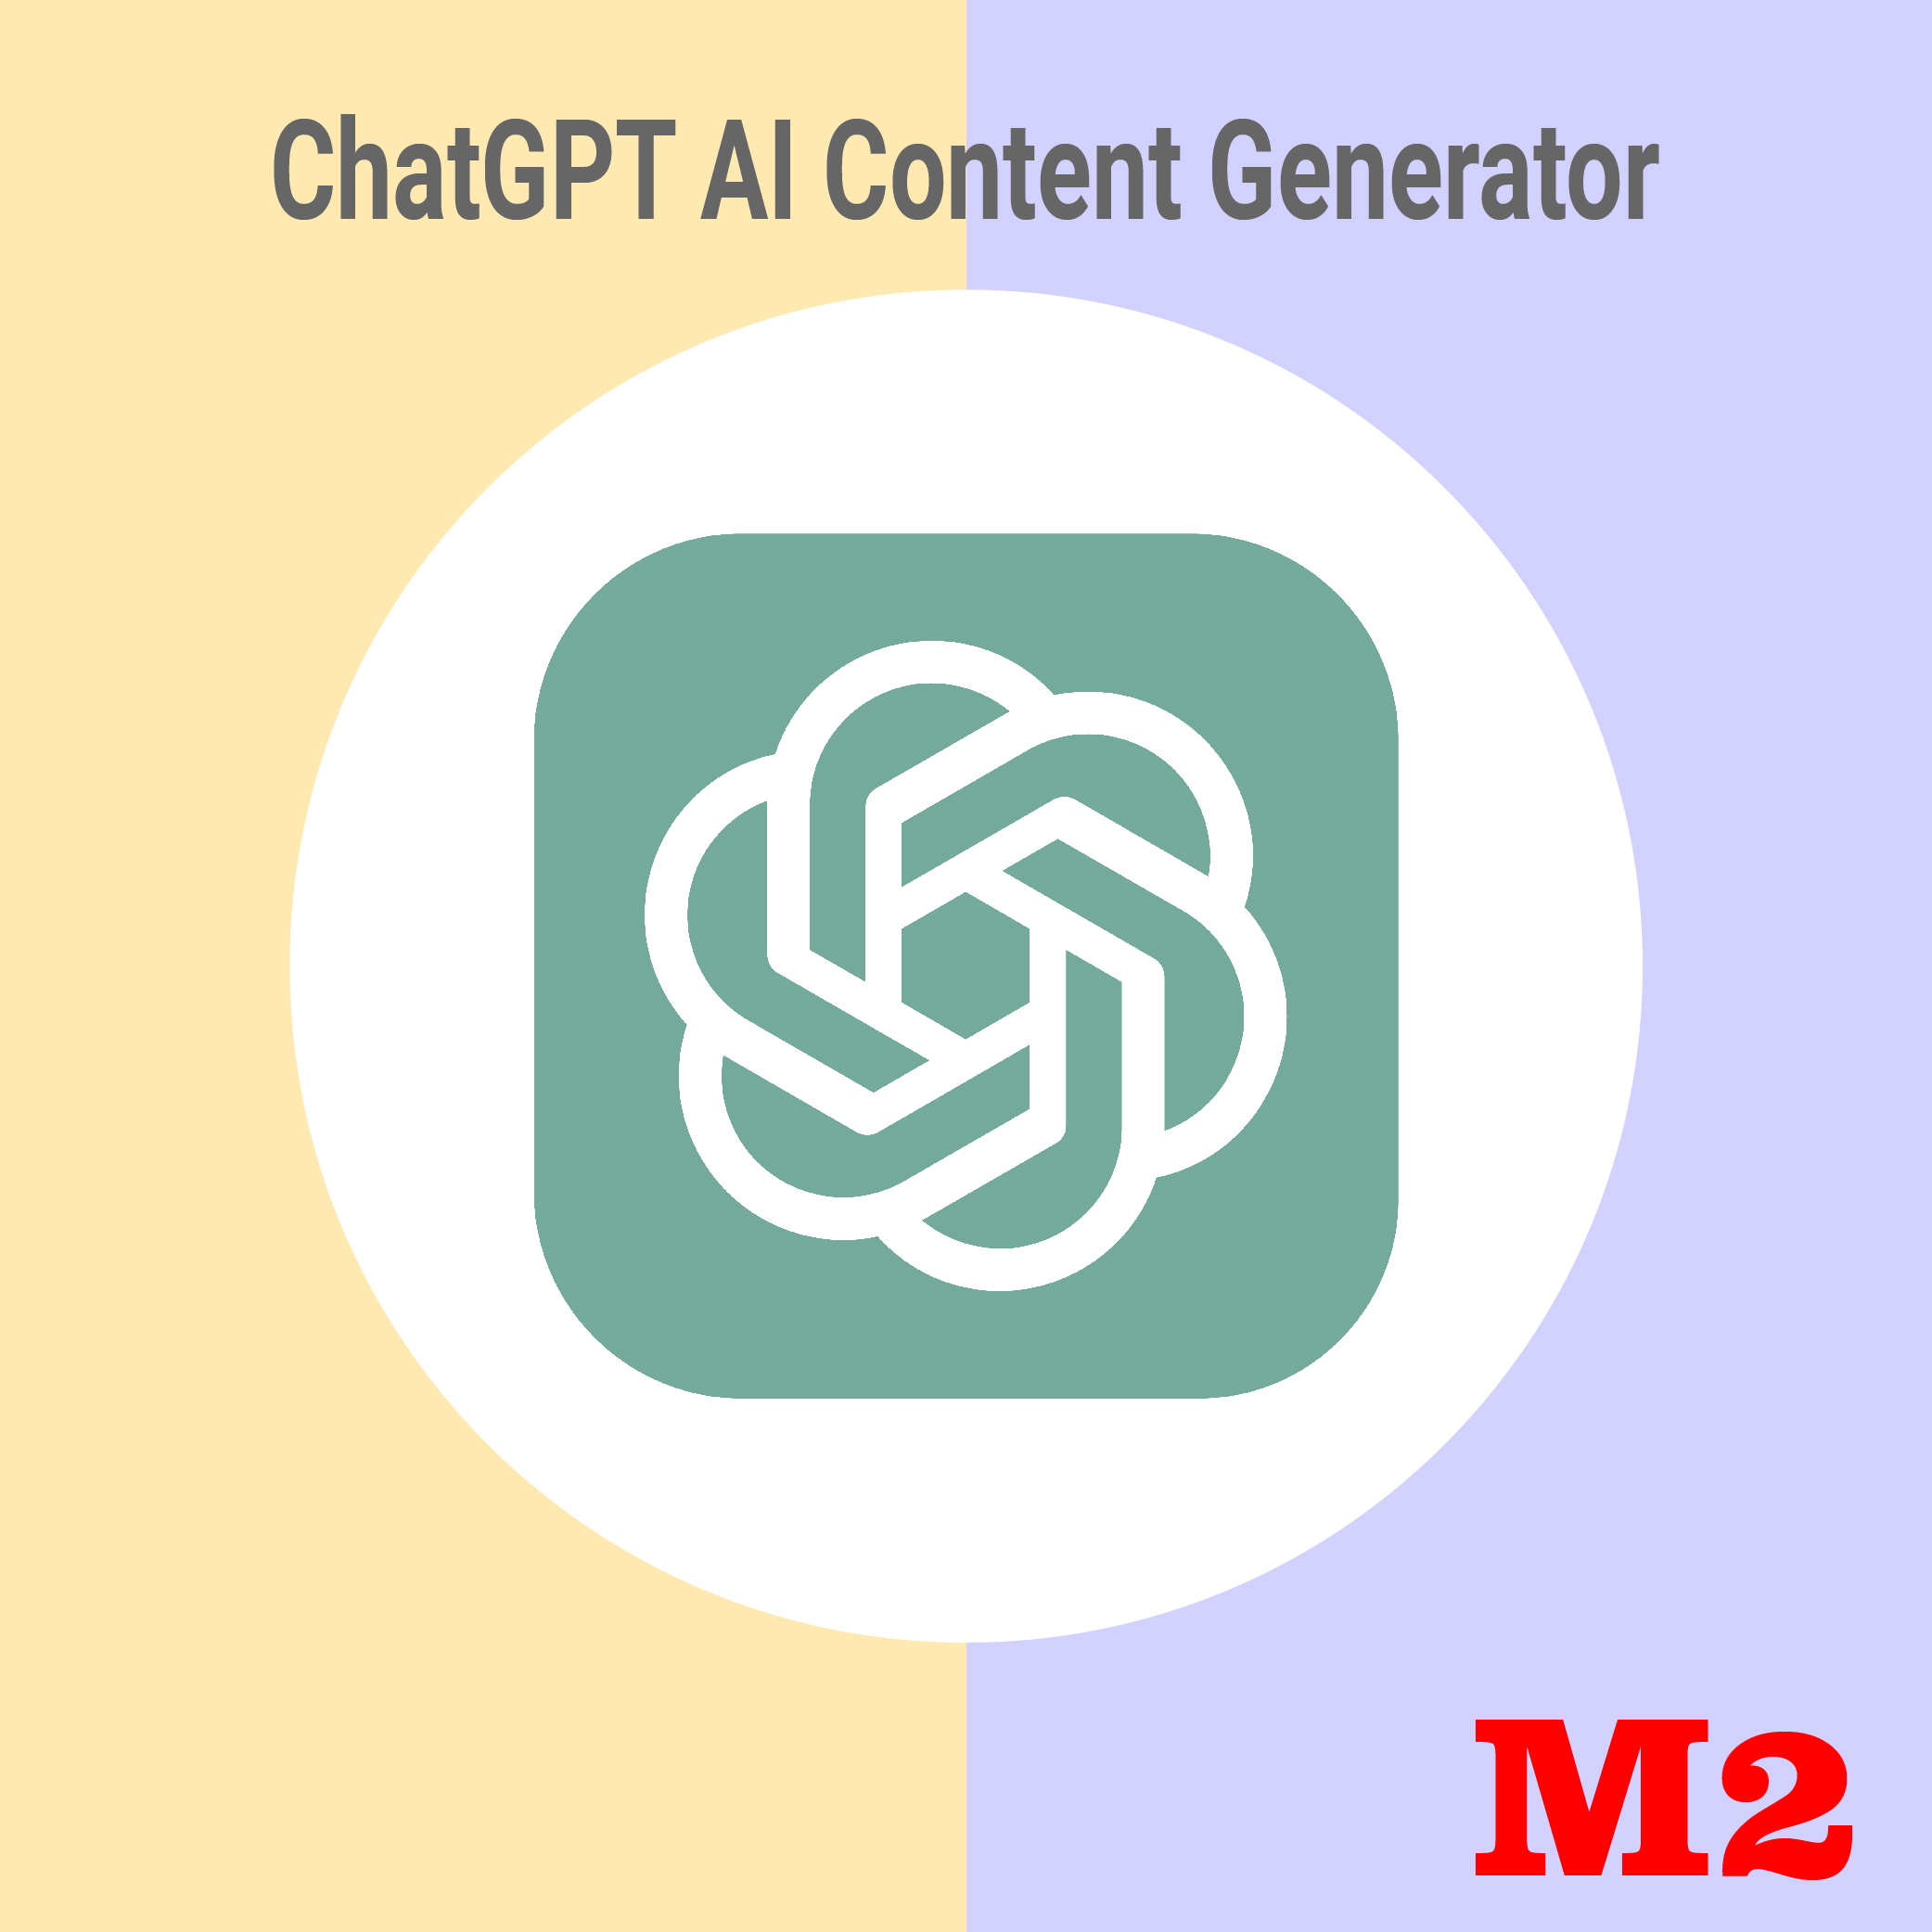 ChatGPT AI Content Generator for Magento 2